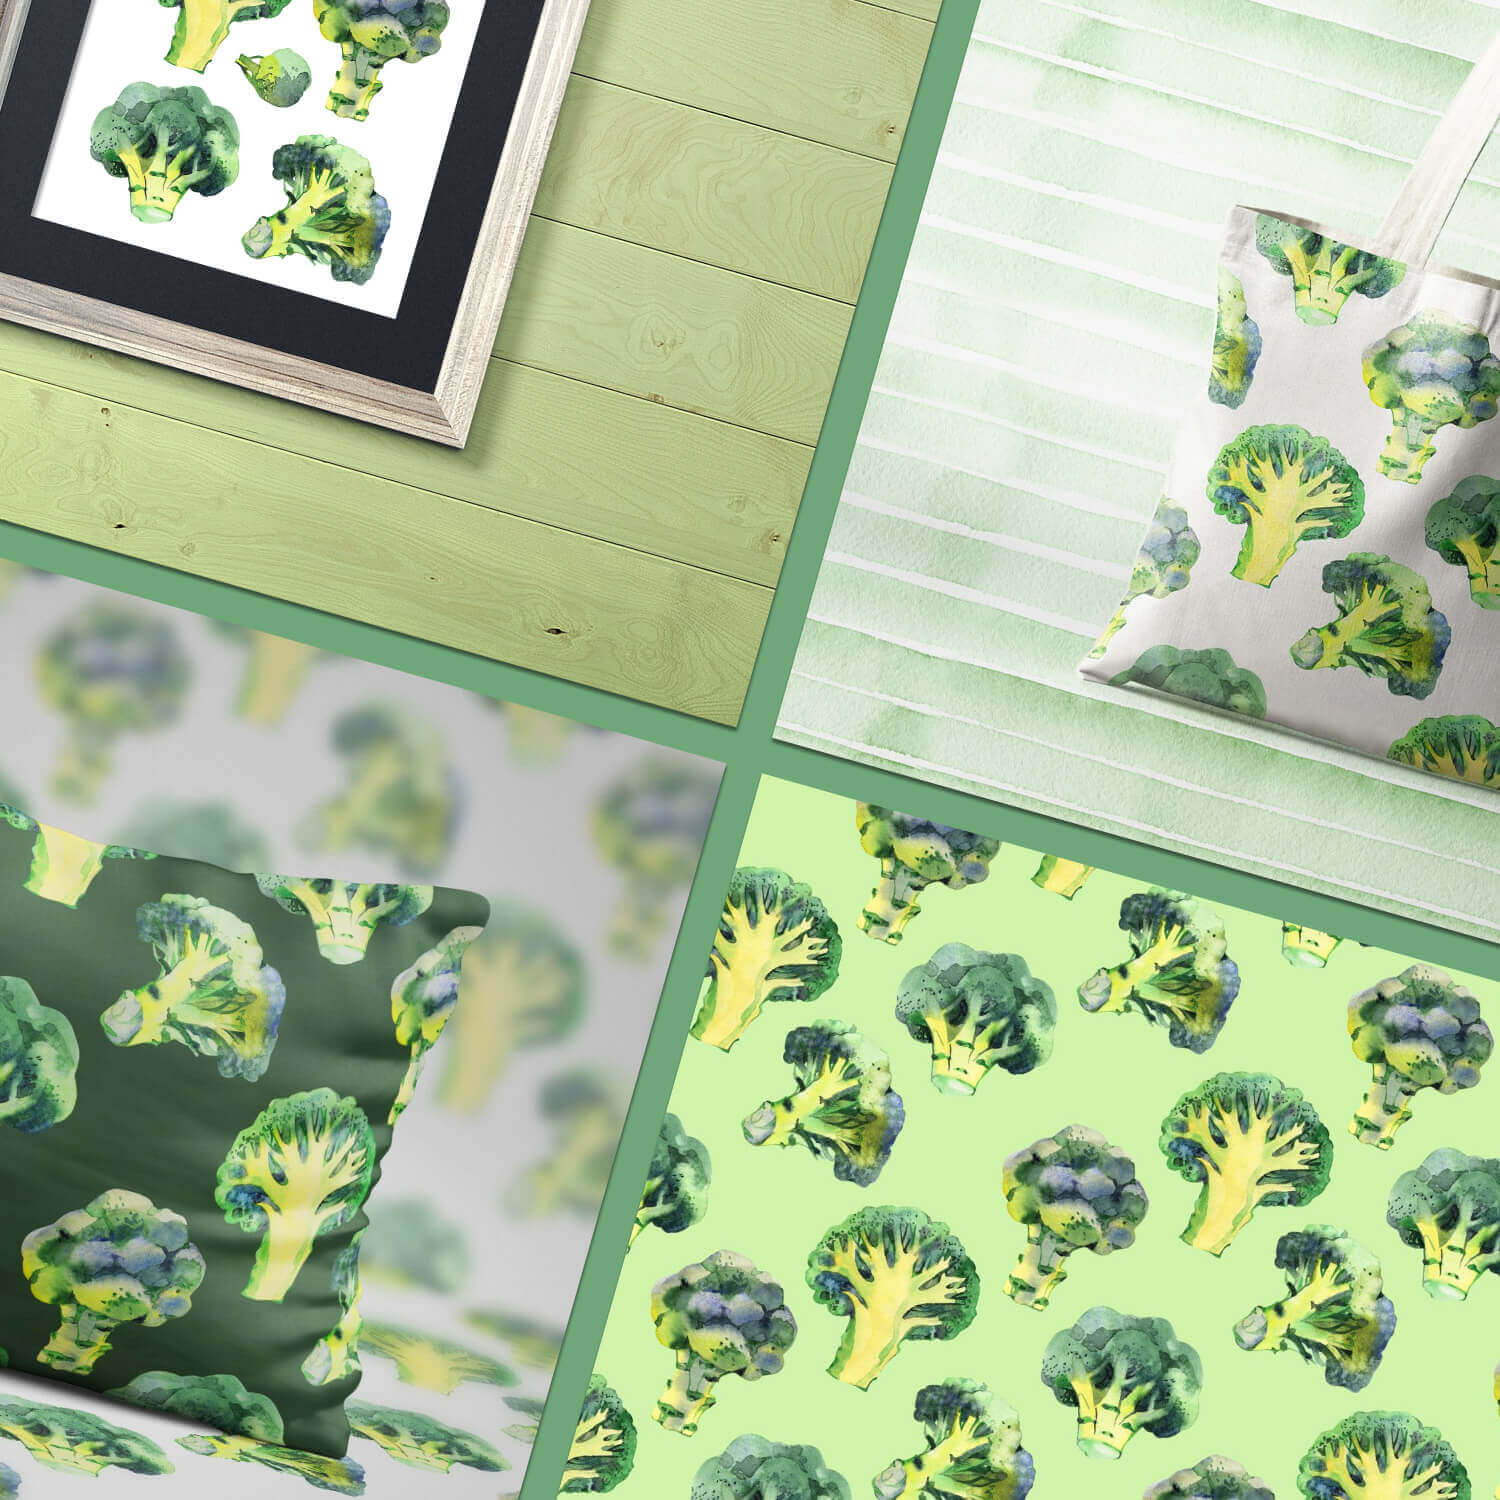 Four pictures with examples of the use of broccoli print.